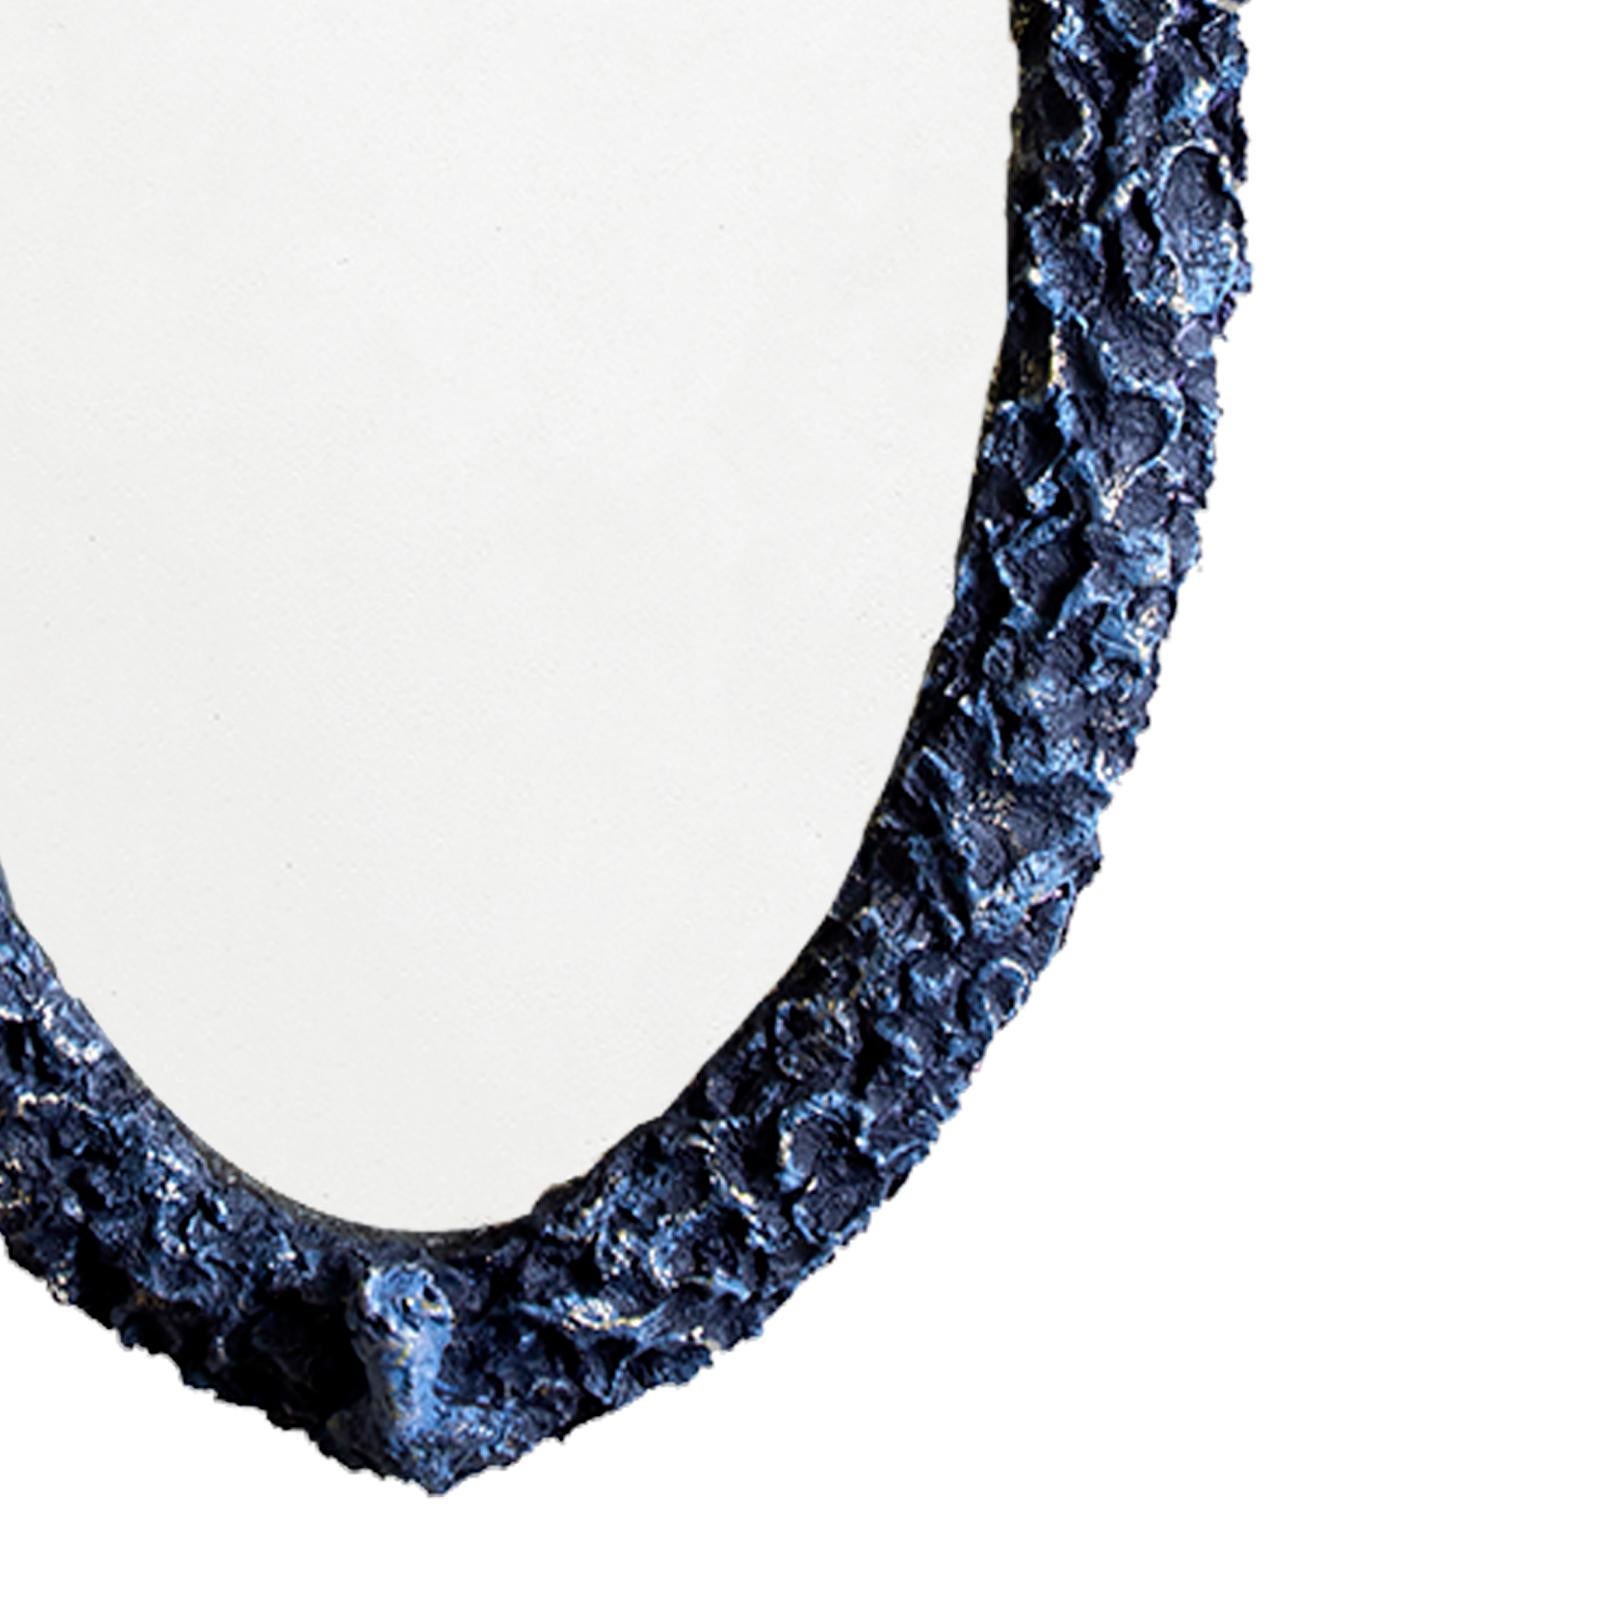 

Margit Wittig's classical yet curious mirrors are filled with individuality.
With her artistic eye, Margit’s hand-sculpted, textural frames have a signature portrait head placed at the lowest point.
Each mirror is cast, applying multiple